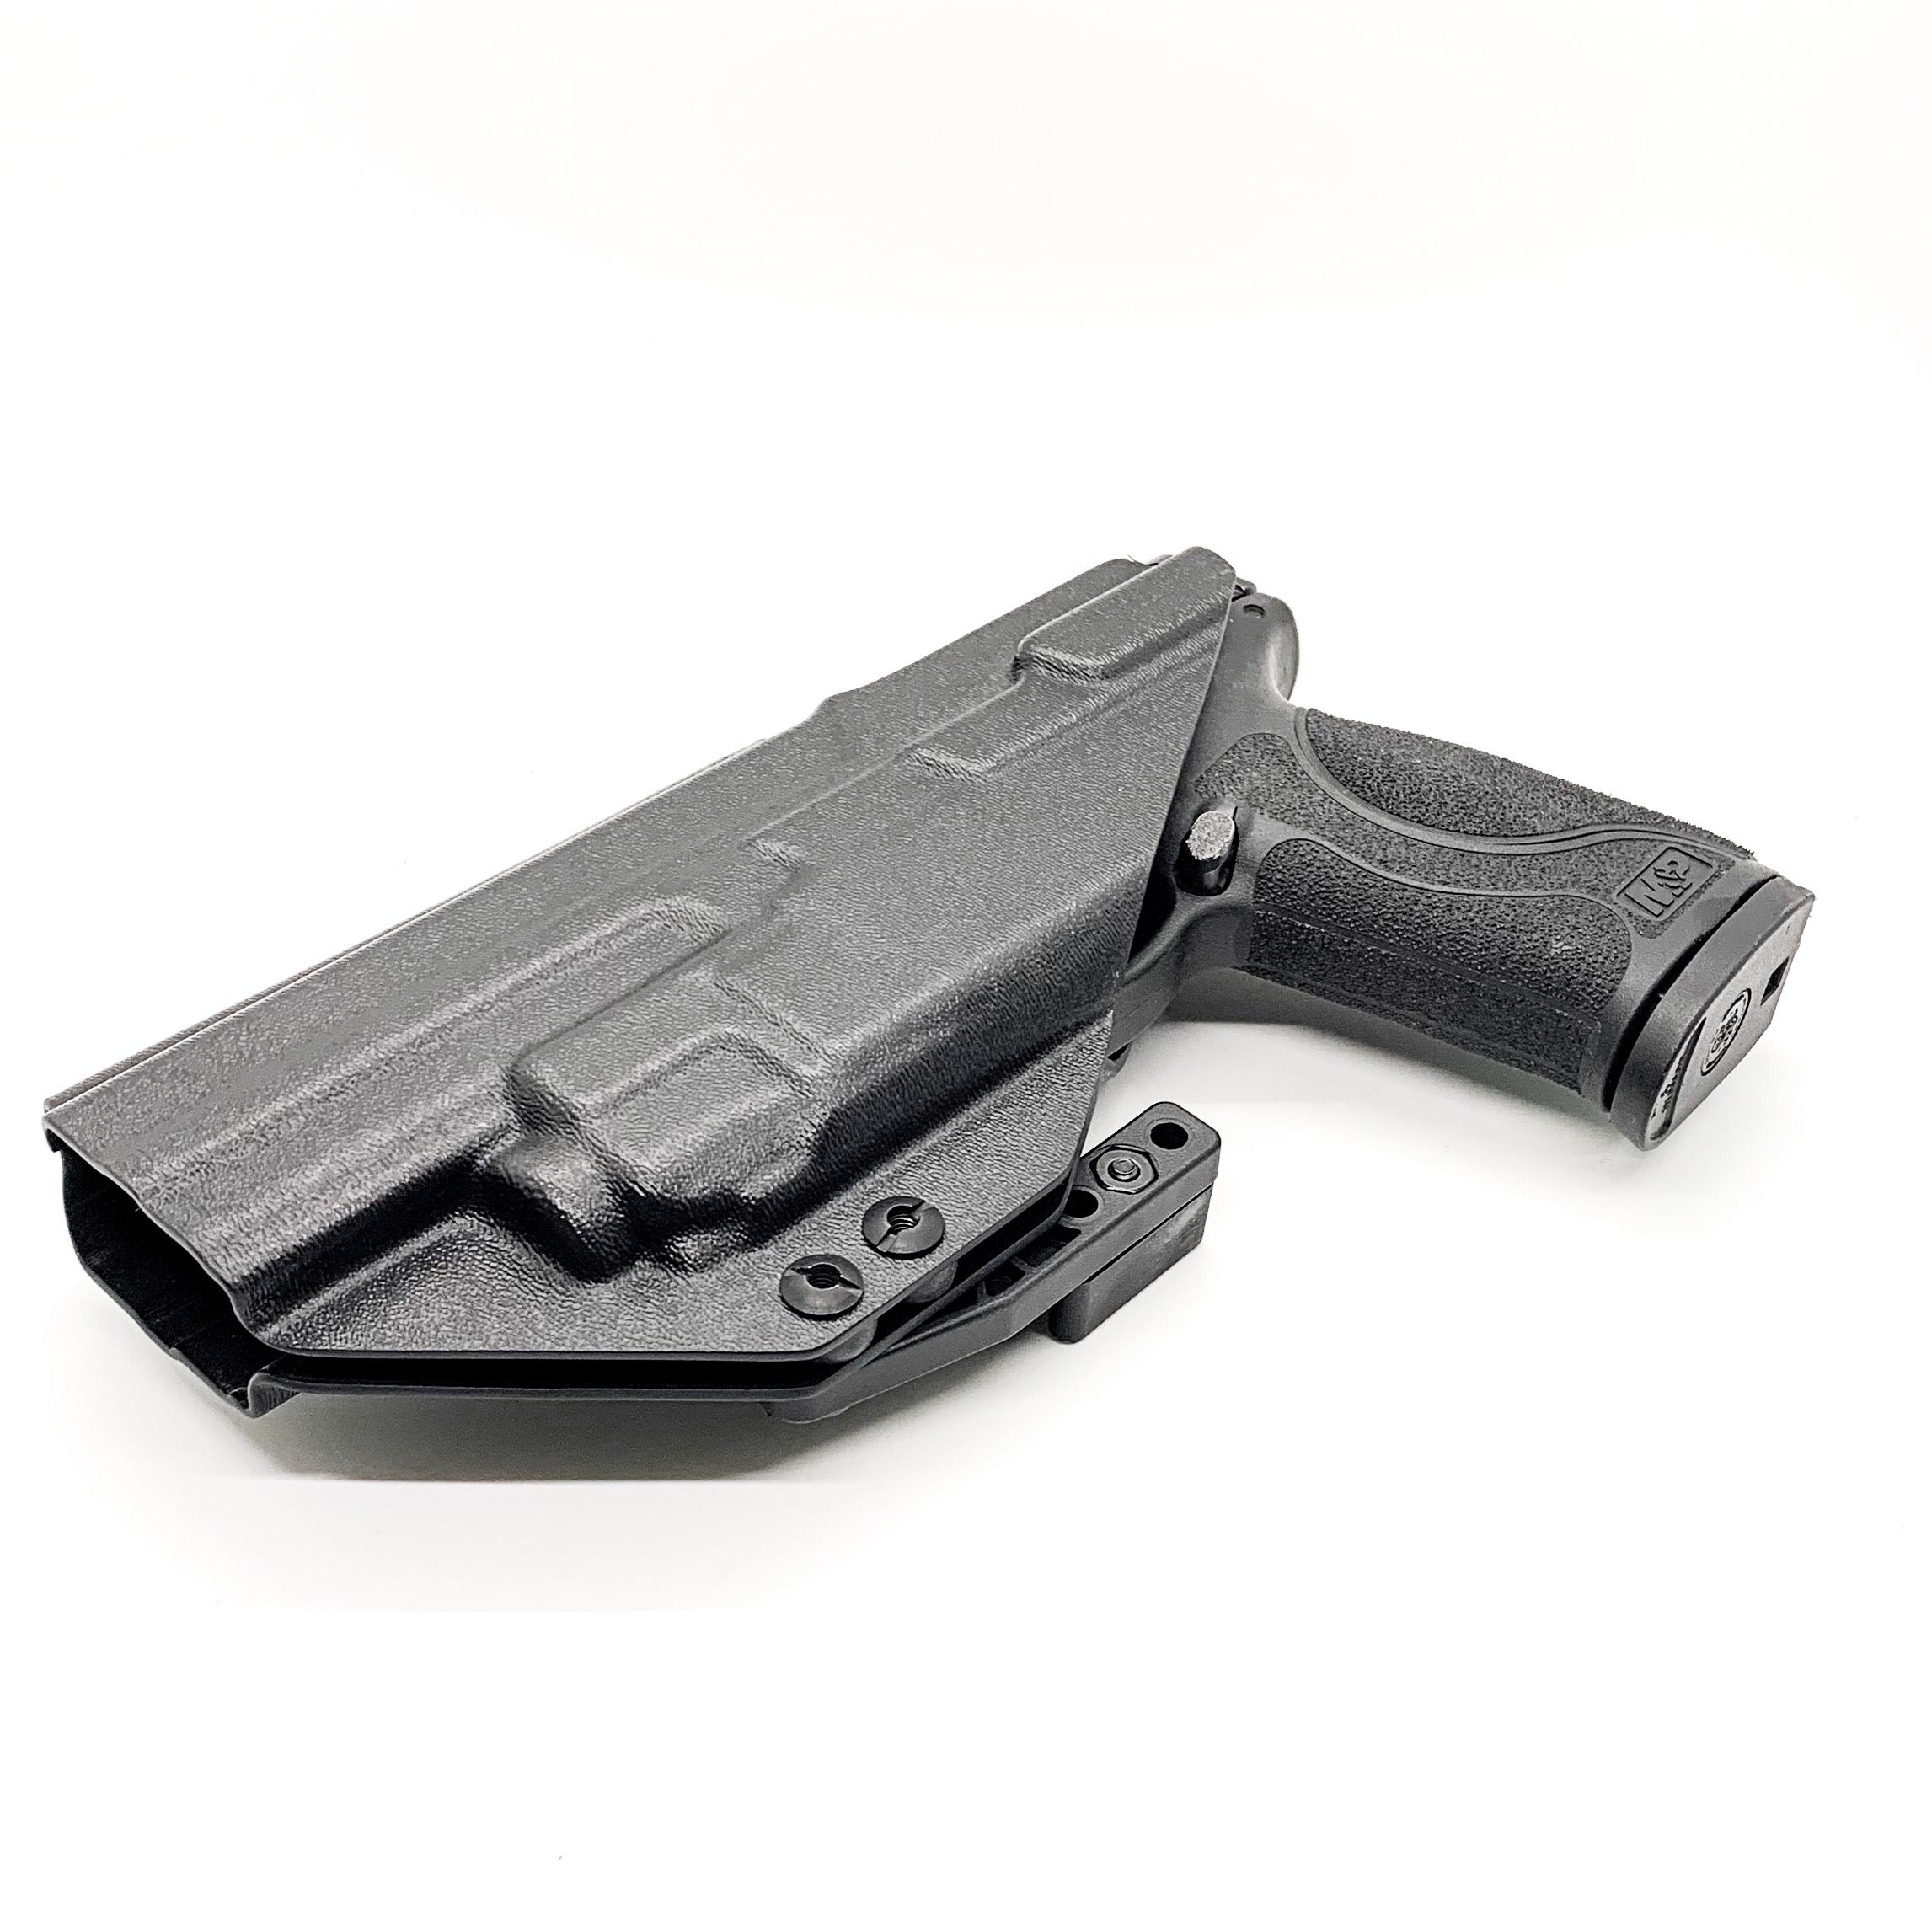 For the Best IWB AIWB Inside Waistband Kydex Taco Holster designed to fit the Smith and Wesson M&P 4" and 4.6" 10MM M2.0 pistol with thumb safety & TLR-8A, shop Four Brothers Holsters.  Full sweat guard, adjustable retention, profiled for a red dot sight. Made in the USA for veterans and law enforcement. 